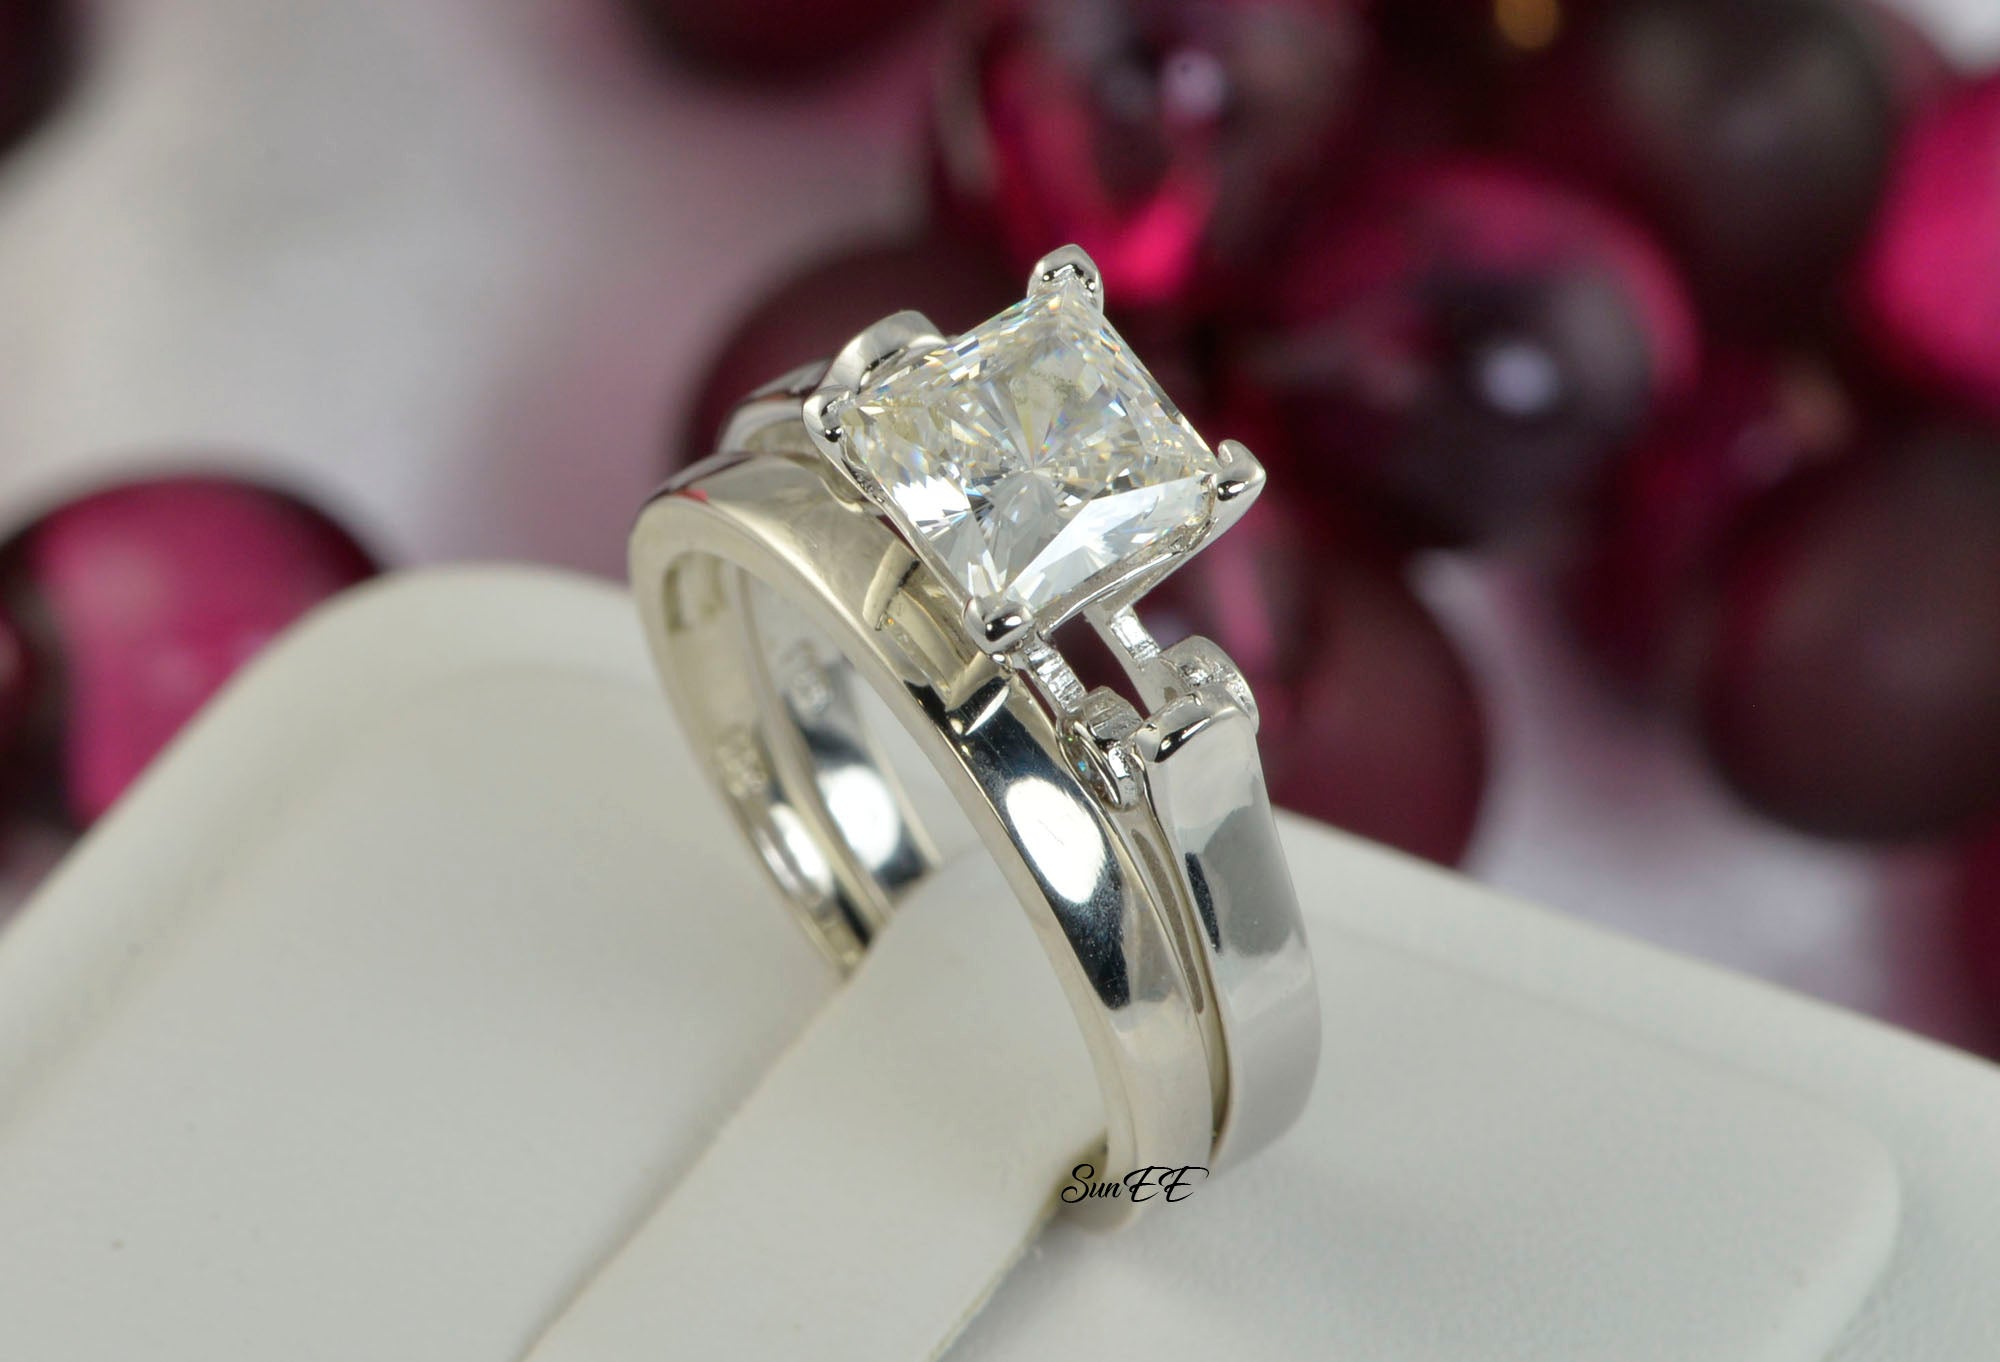 Crystal Diamond Ring Set: Luxury 925 Silver Wedding Ring For Women Vintage  Engagement & Bridal Jewelry From C6kd, $11.27 | DHgate.Com